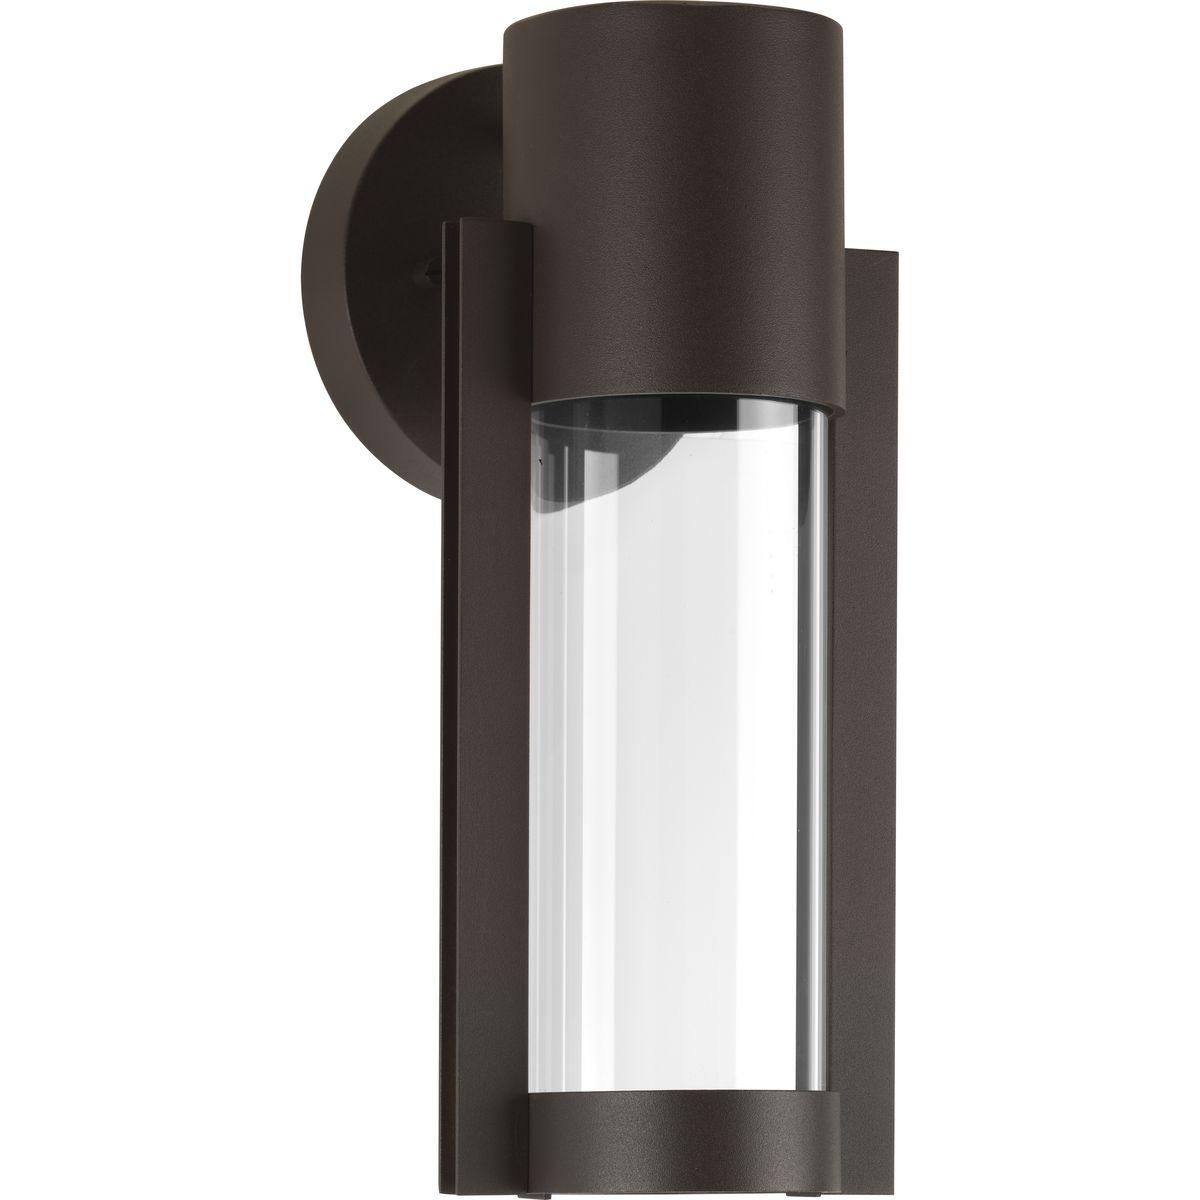 Hubbell P560051-020-30 A modern small outdoor LED sconce with an architectural-inspired open linear frame and clear glass diffuser. Finished in Antique Bronze.  ; A modern outdoor LED sconce. ; LED source provides energy efficient source with low maintenance and cost savings be